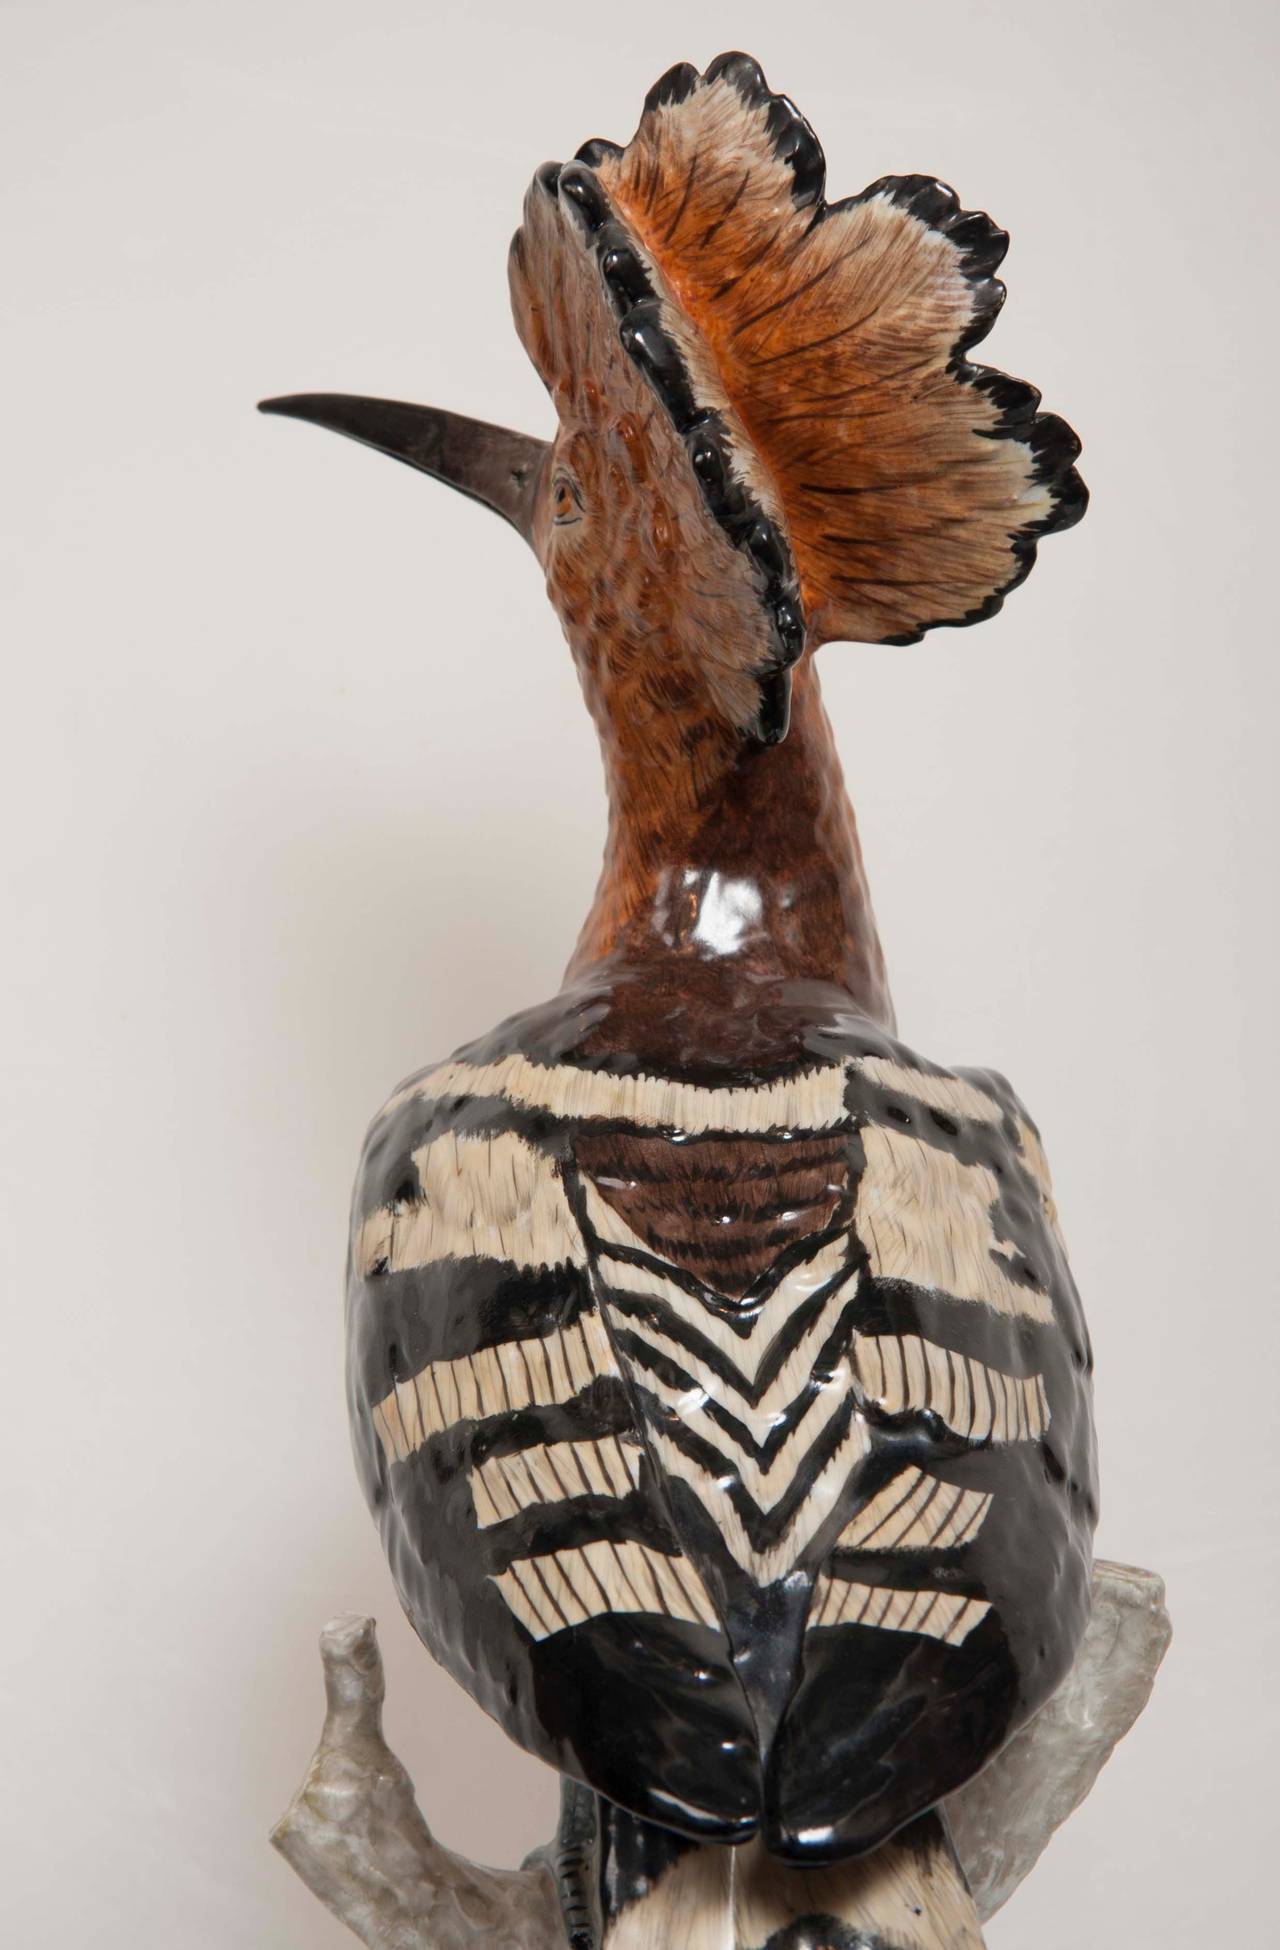 Early 20th Century Porcelain Hoopoe Bird by the Carl Thieme Factory, Dresden